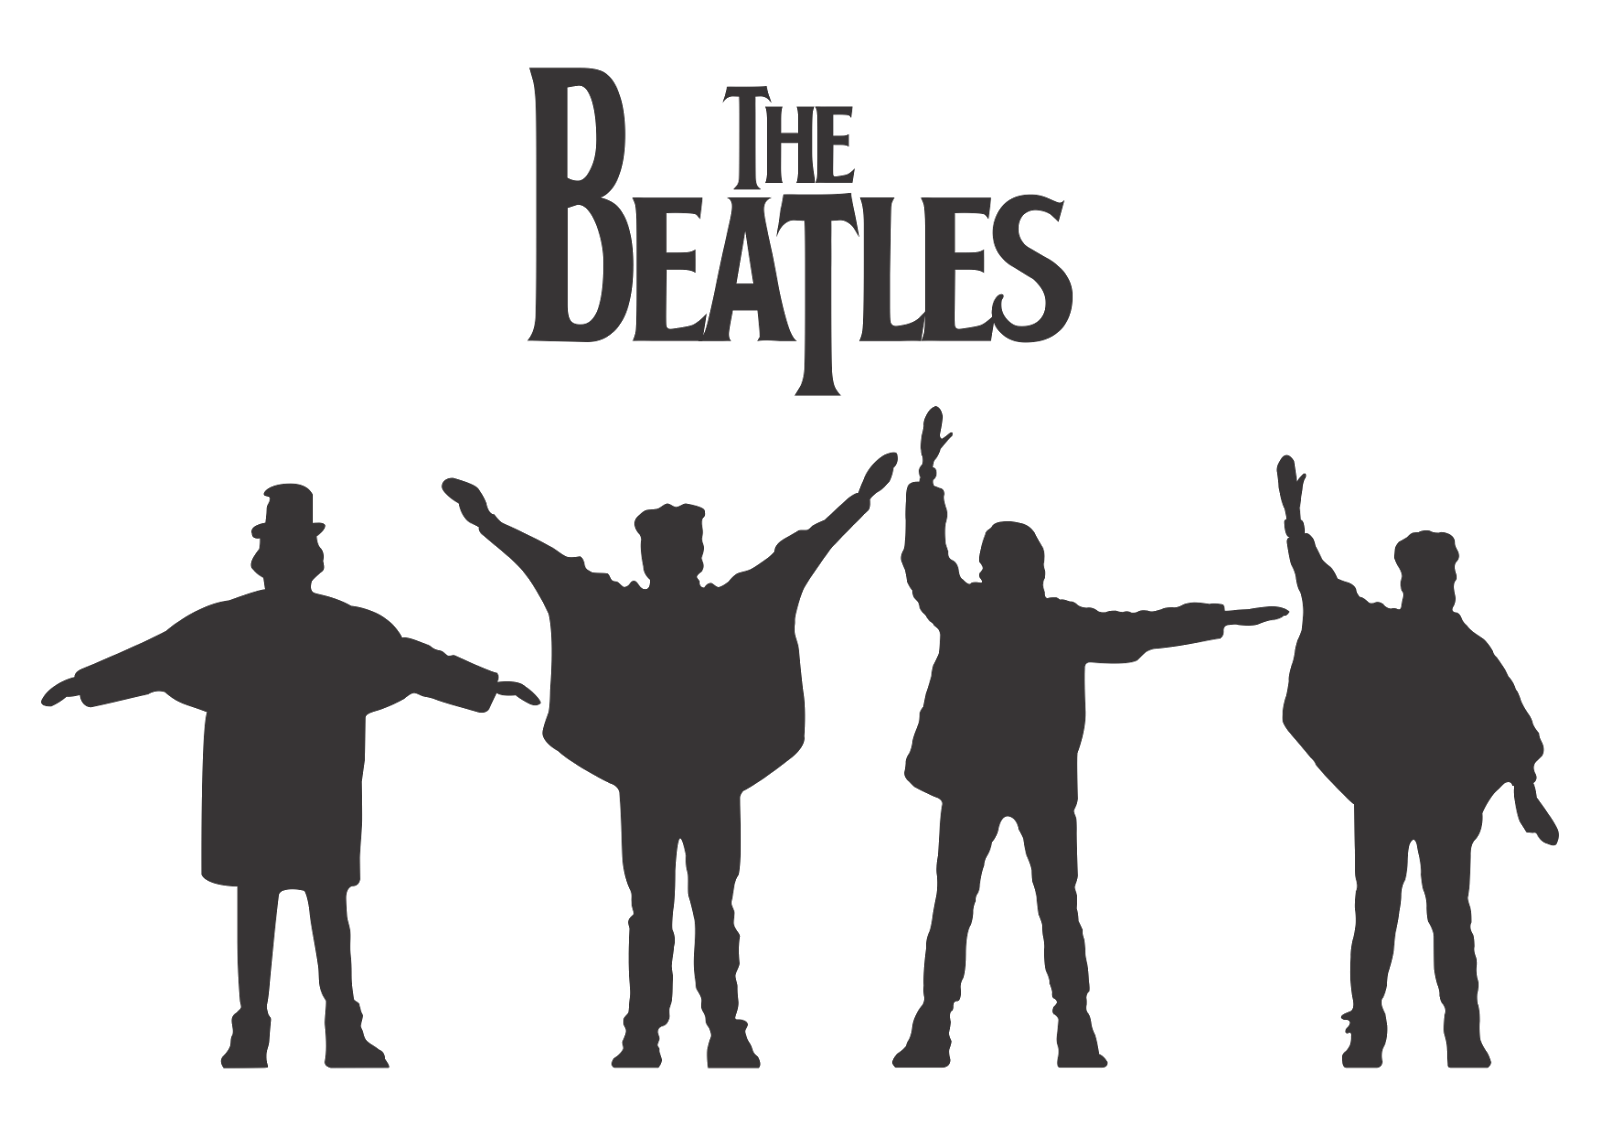 Tribute to the Beatles